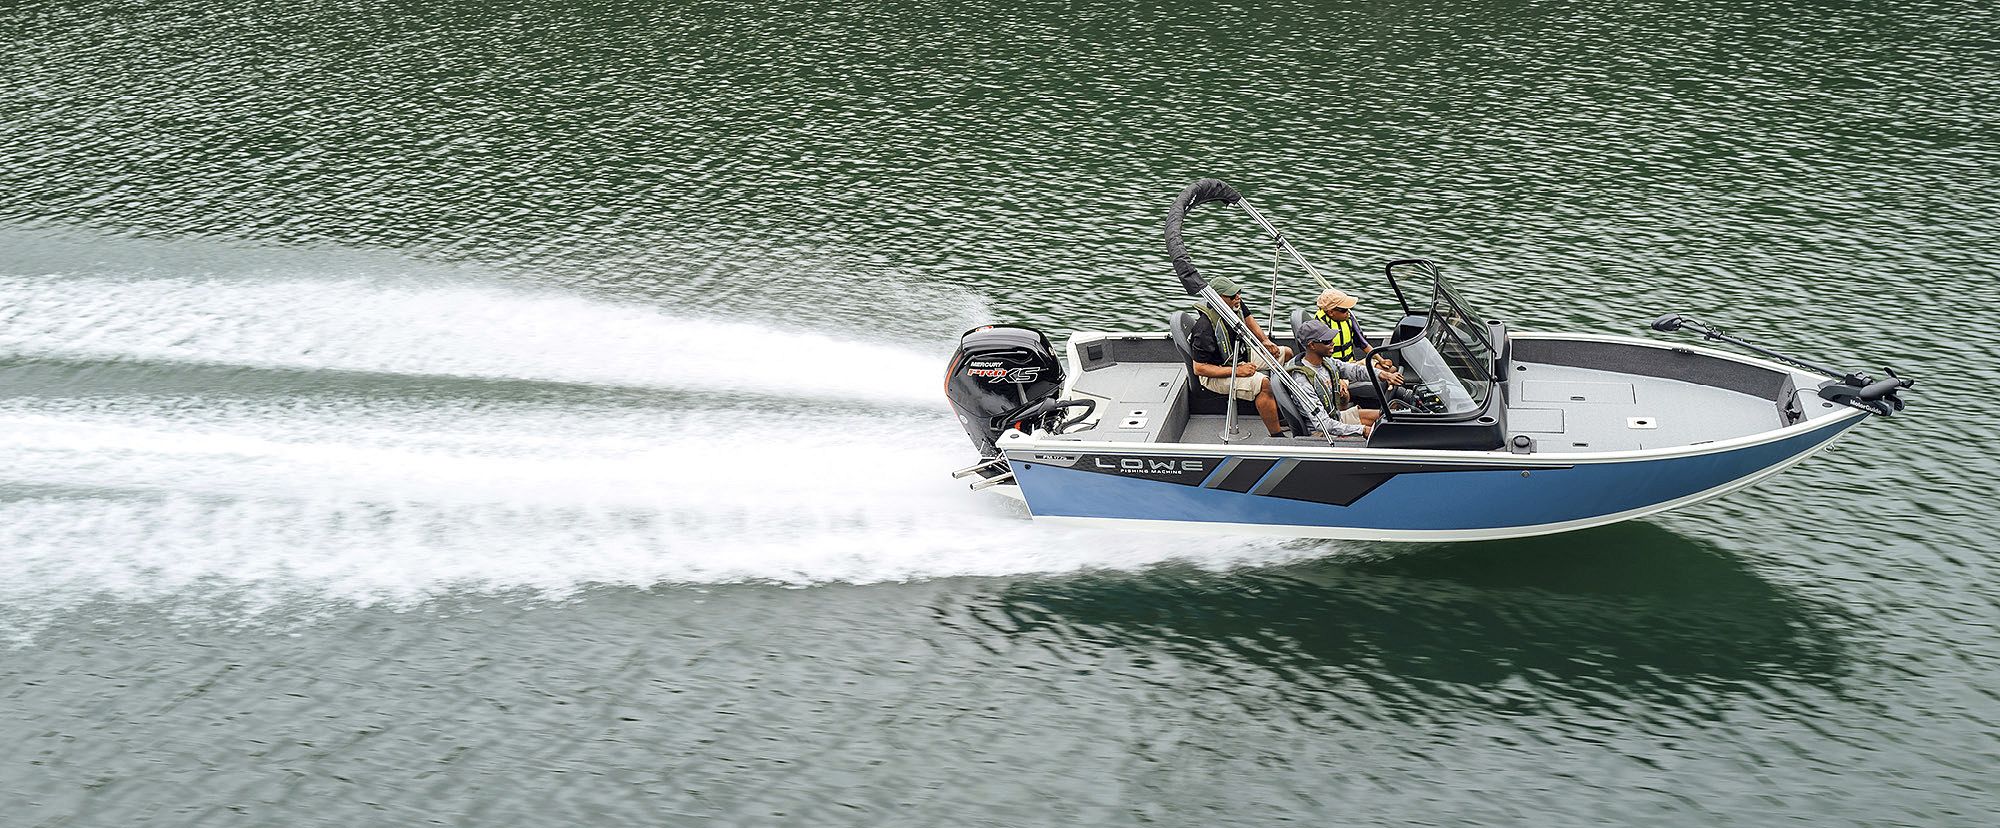 Top 10 Boats Made by Lowe: Expert Reviews and Ratings